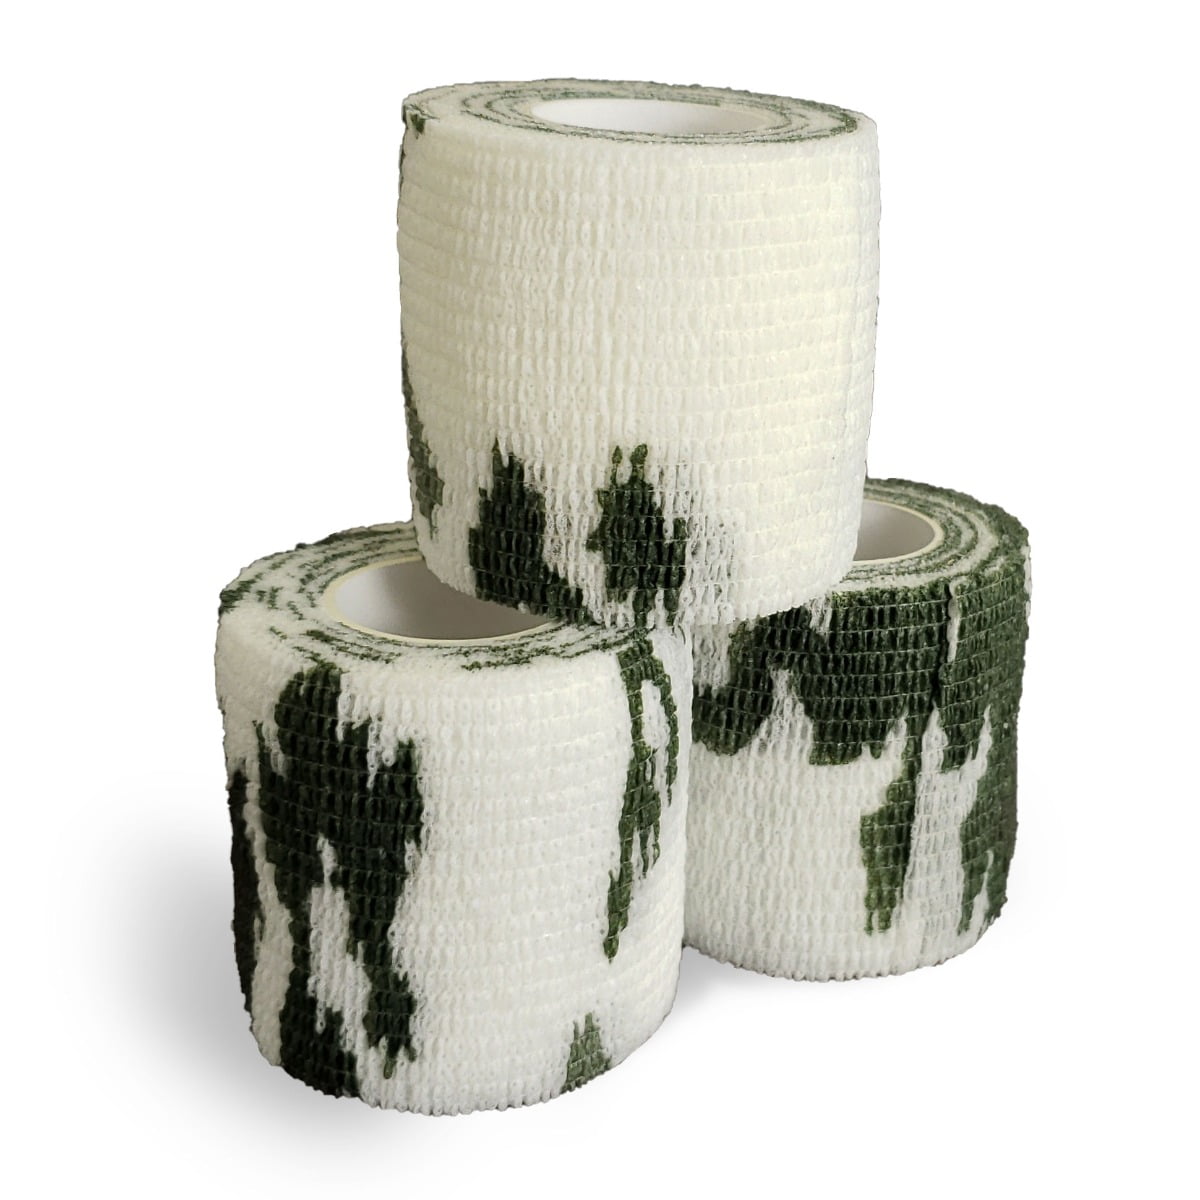 Camouflage Tape Outdoor Camping Camouflage Invisible Duct Tape Camouflage Packag